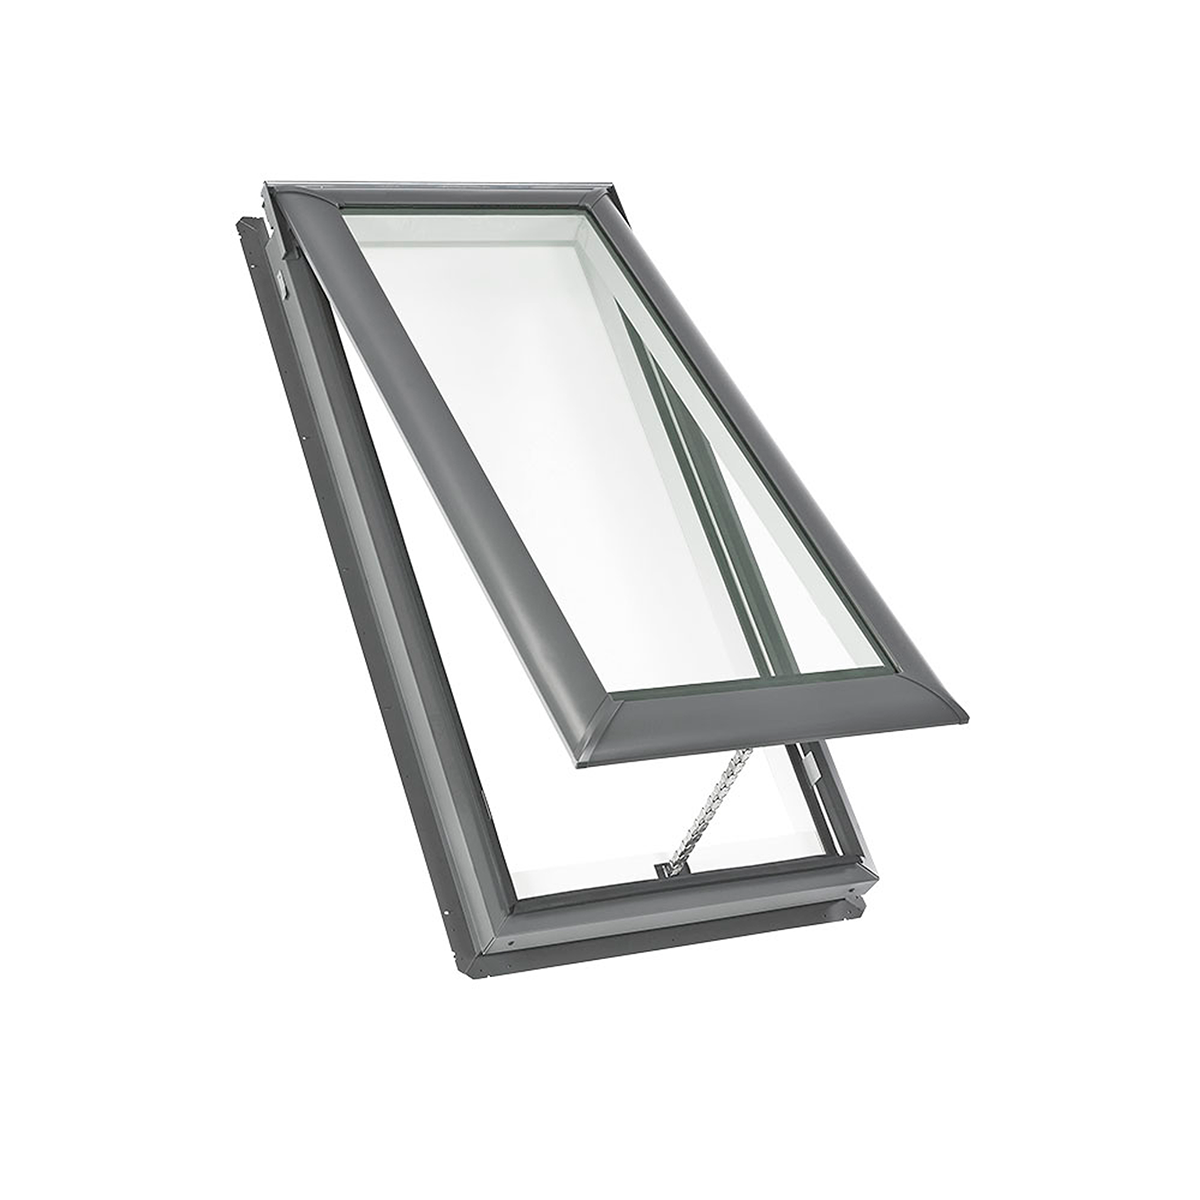 Manual Deck-Mount Skylight with Laminated Low-E3 Glass - 30-1/16 in. x 30 in. - VS M02